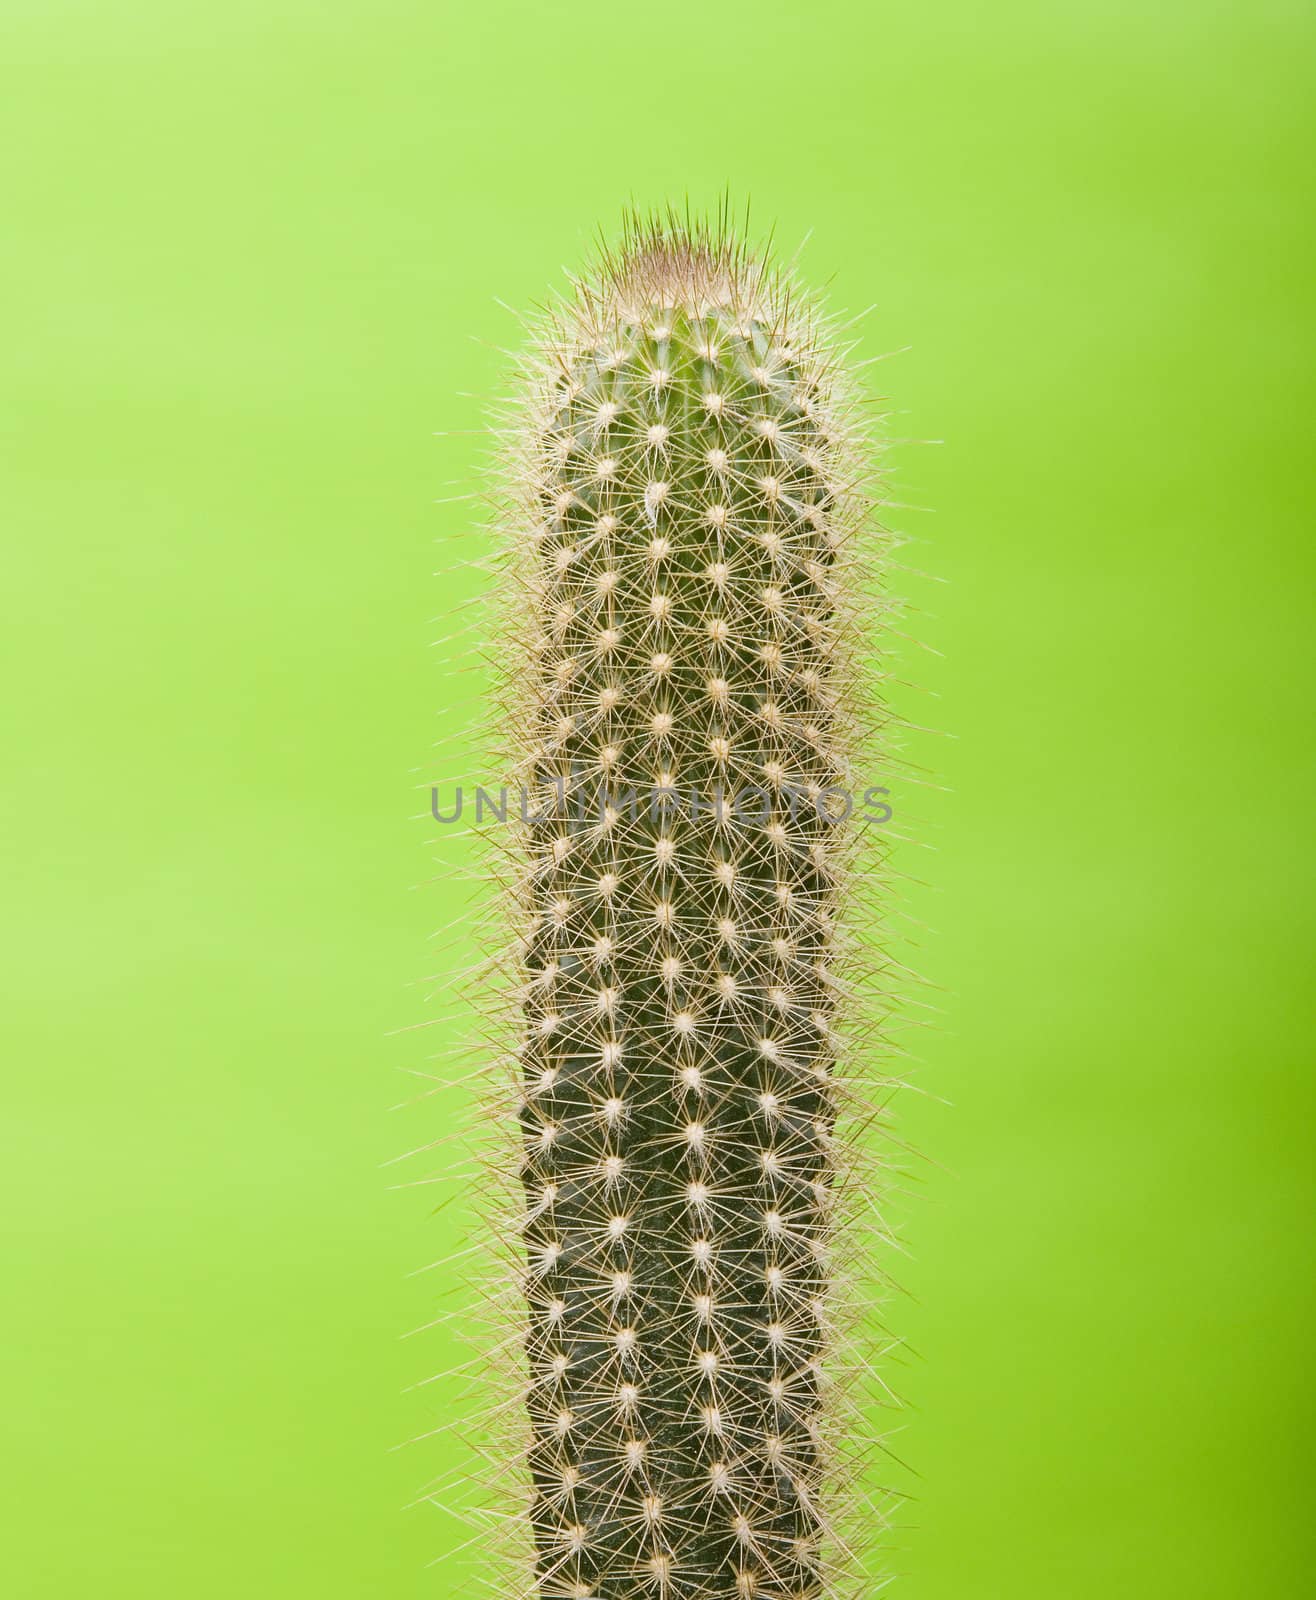 Cactus in fron of green background